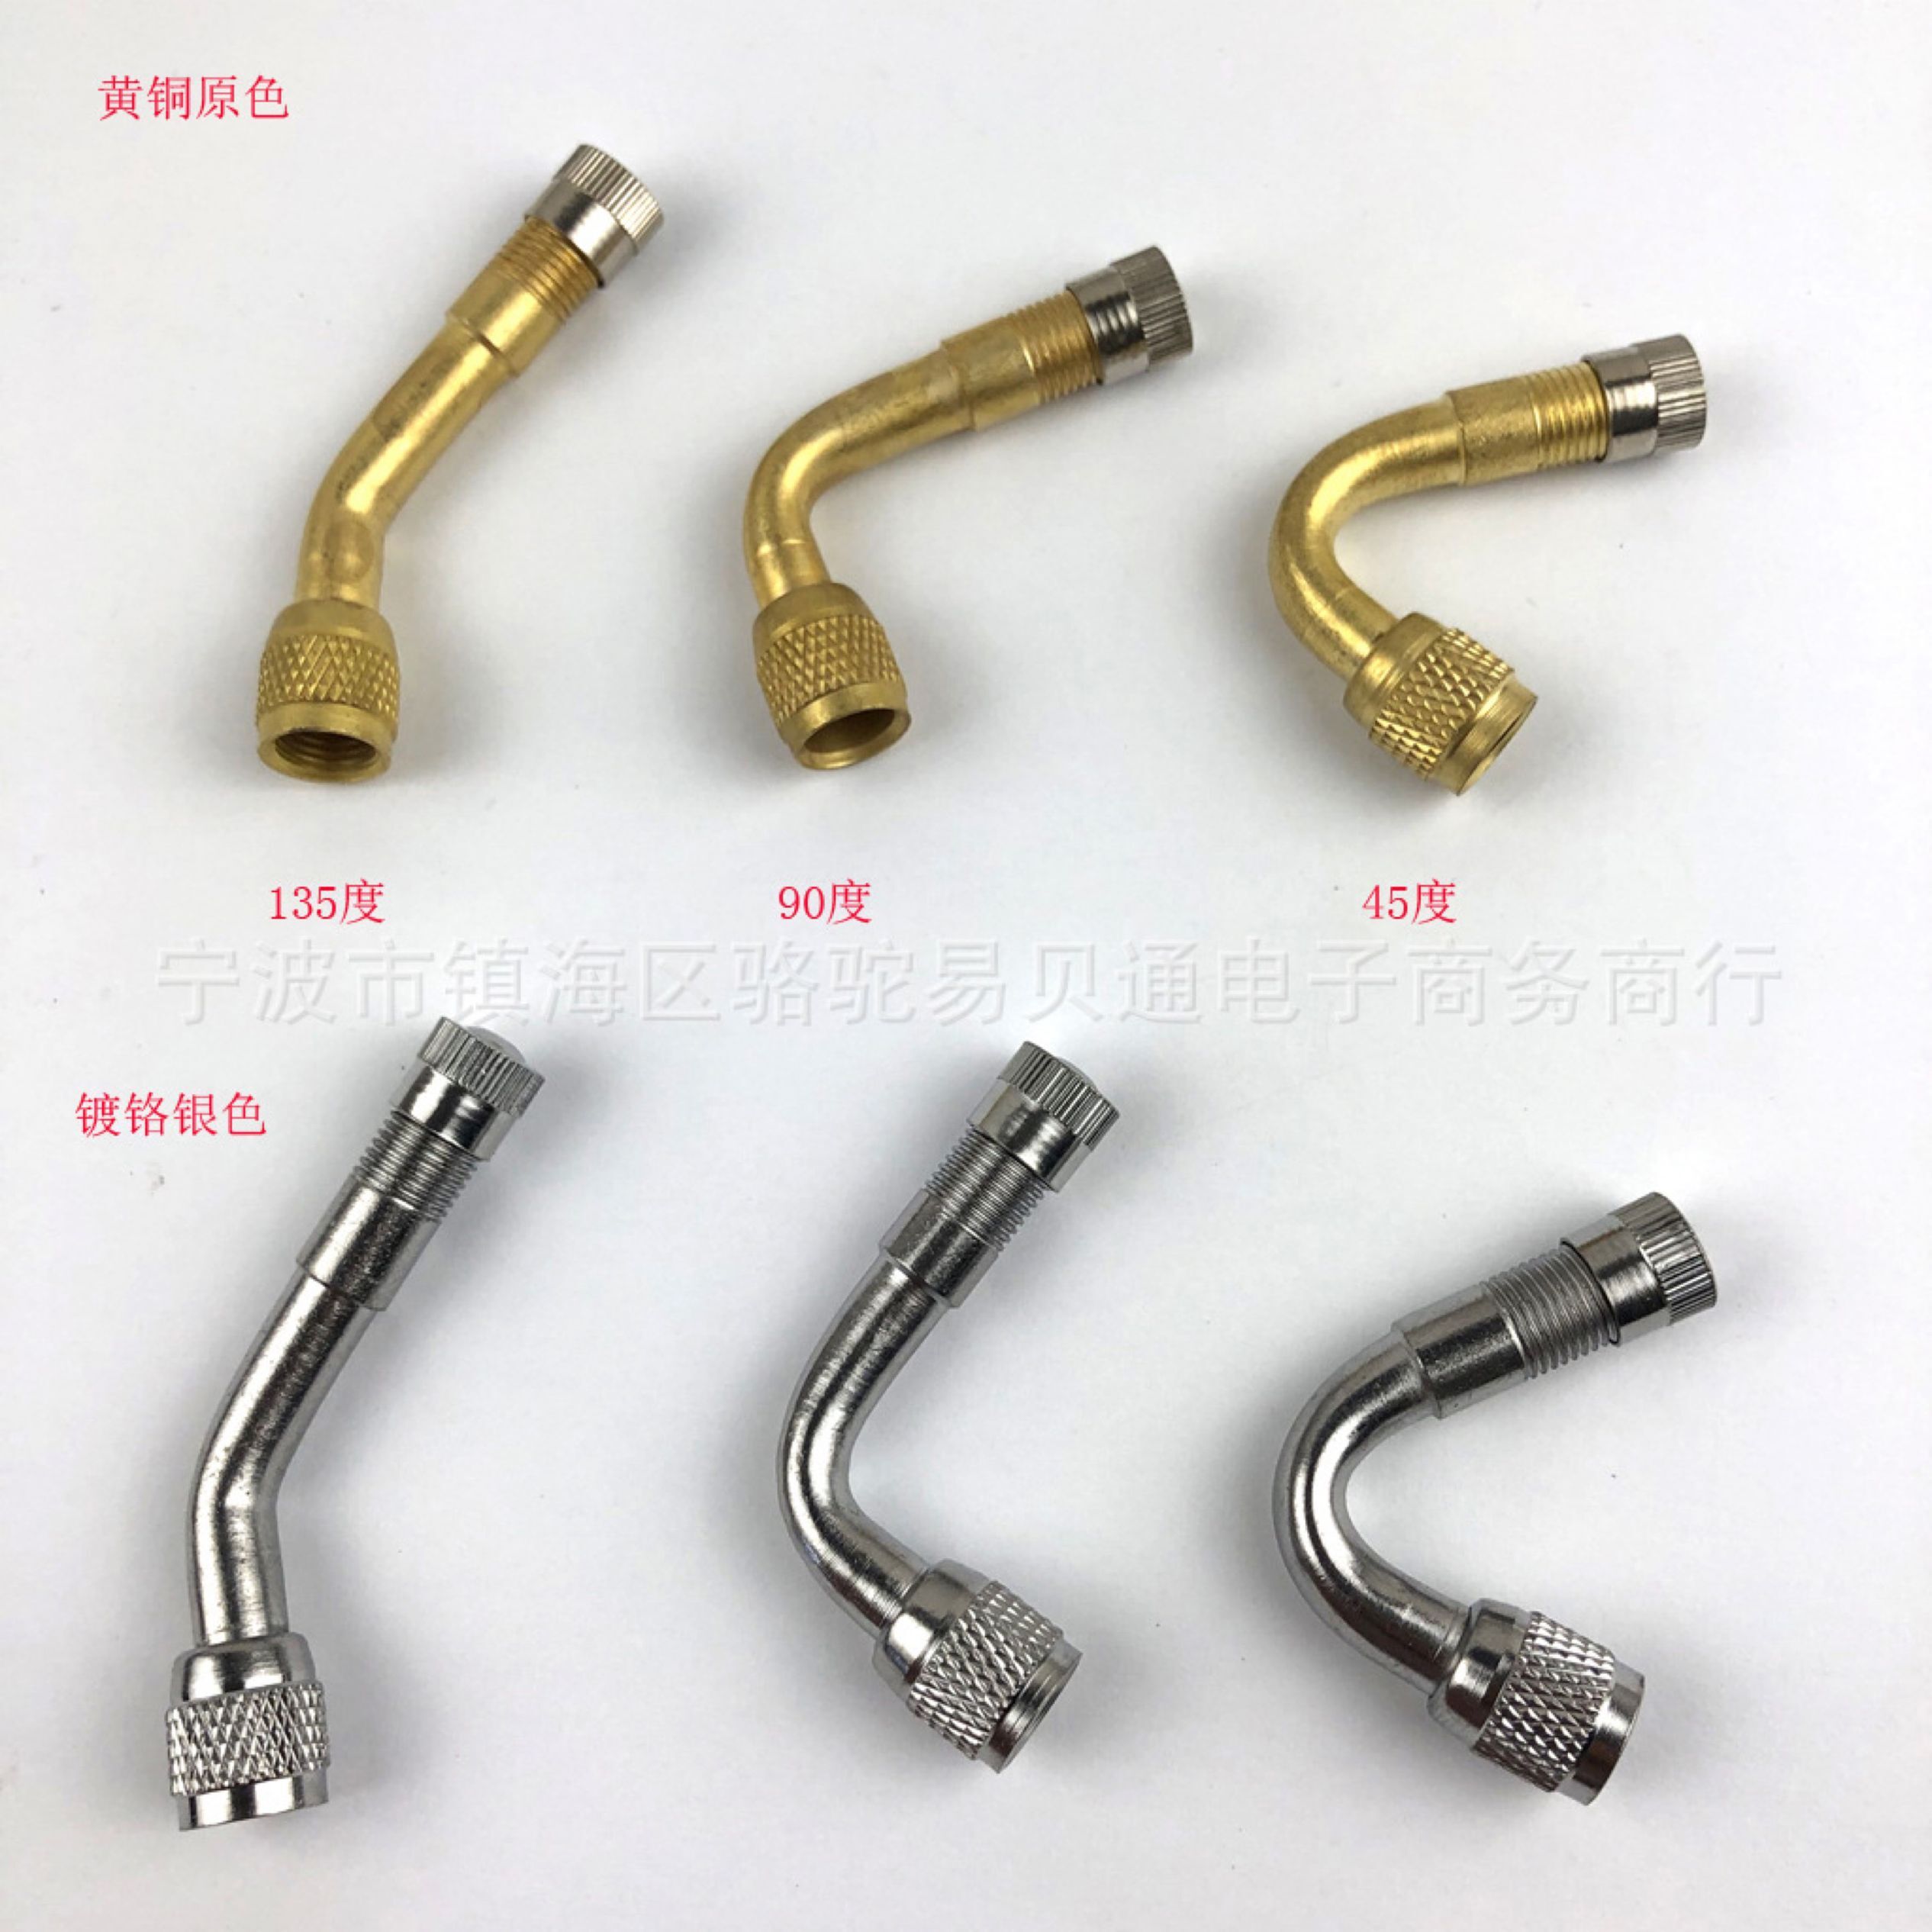 1/2Pcs Motorcycle 45 90 135 Degree Angle Bent Valve Adaptor Tyre Tube Valve Extension Adapter for Truck Car Moto Bike